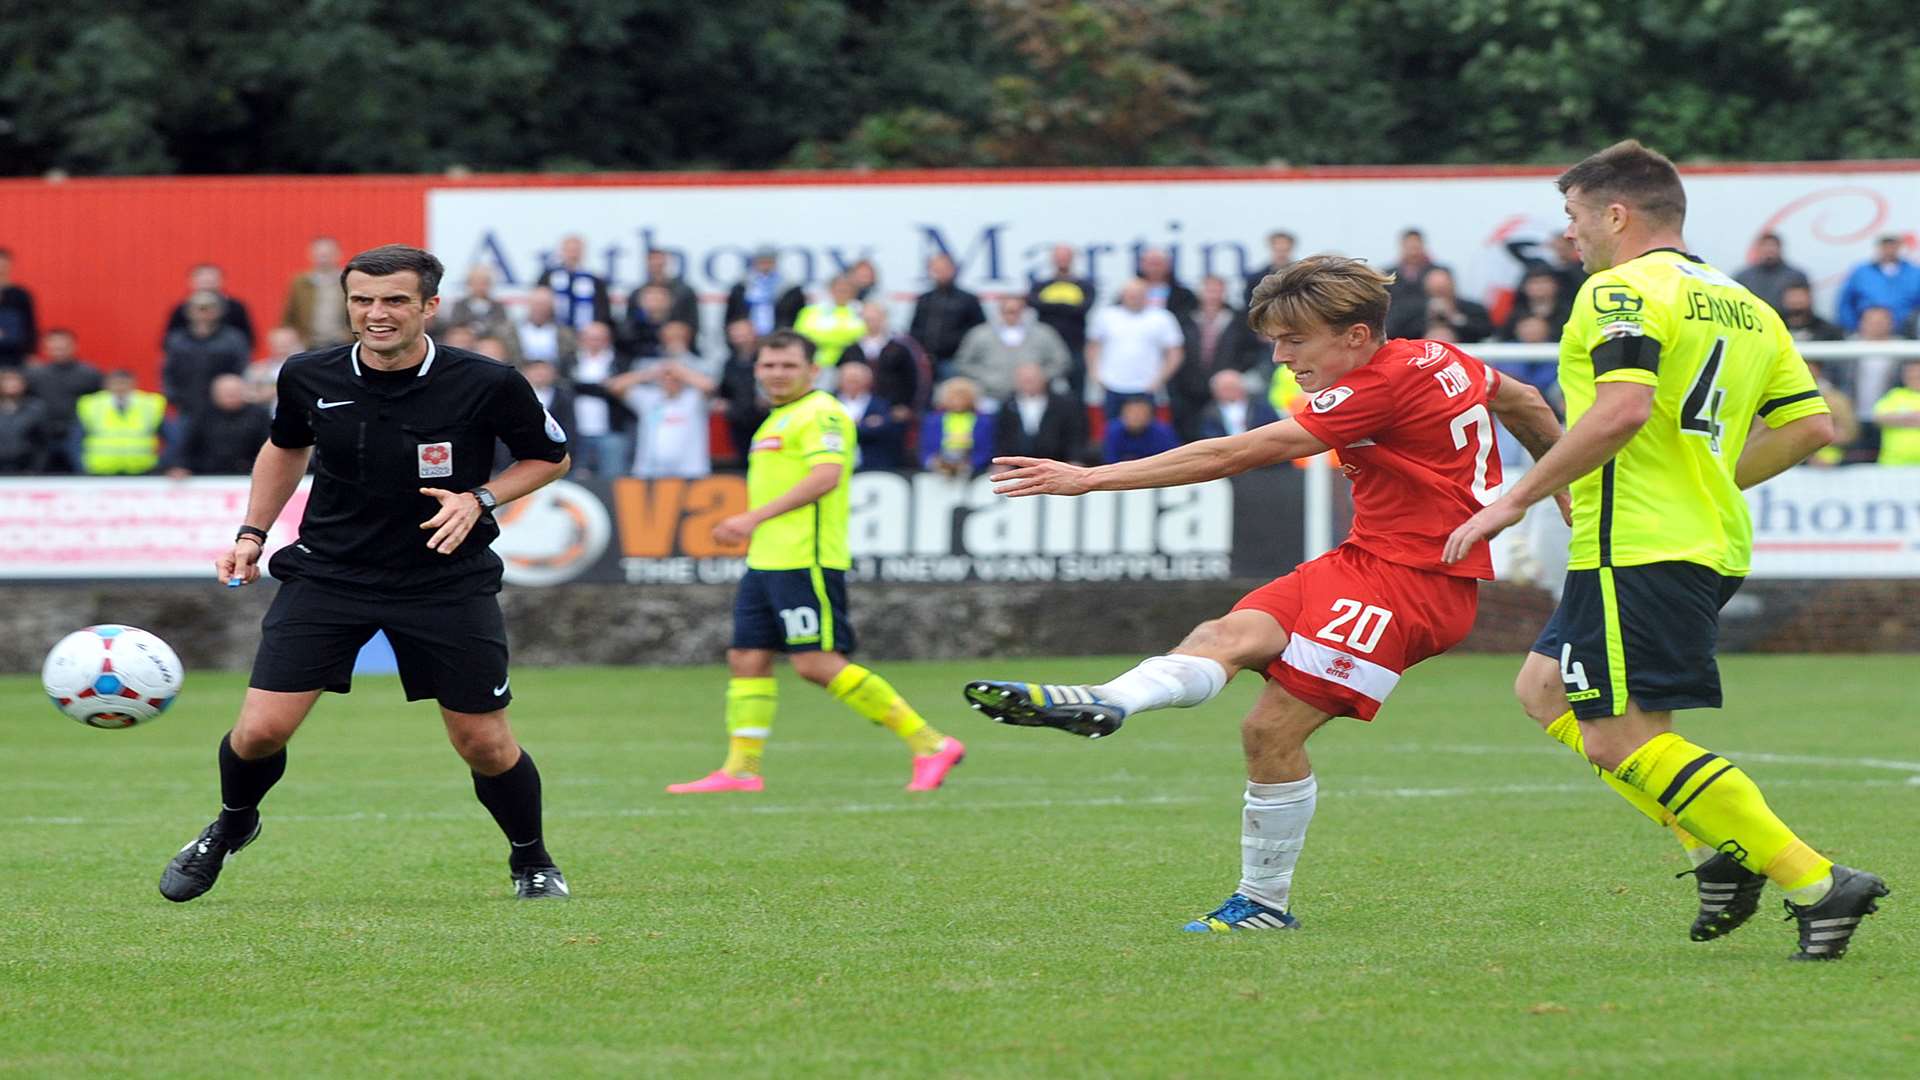 Welling's Sam Corne scores a thunderbolt against Tranmere. Picture: David Brown